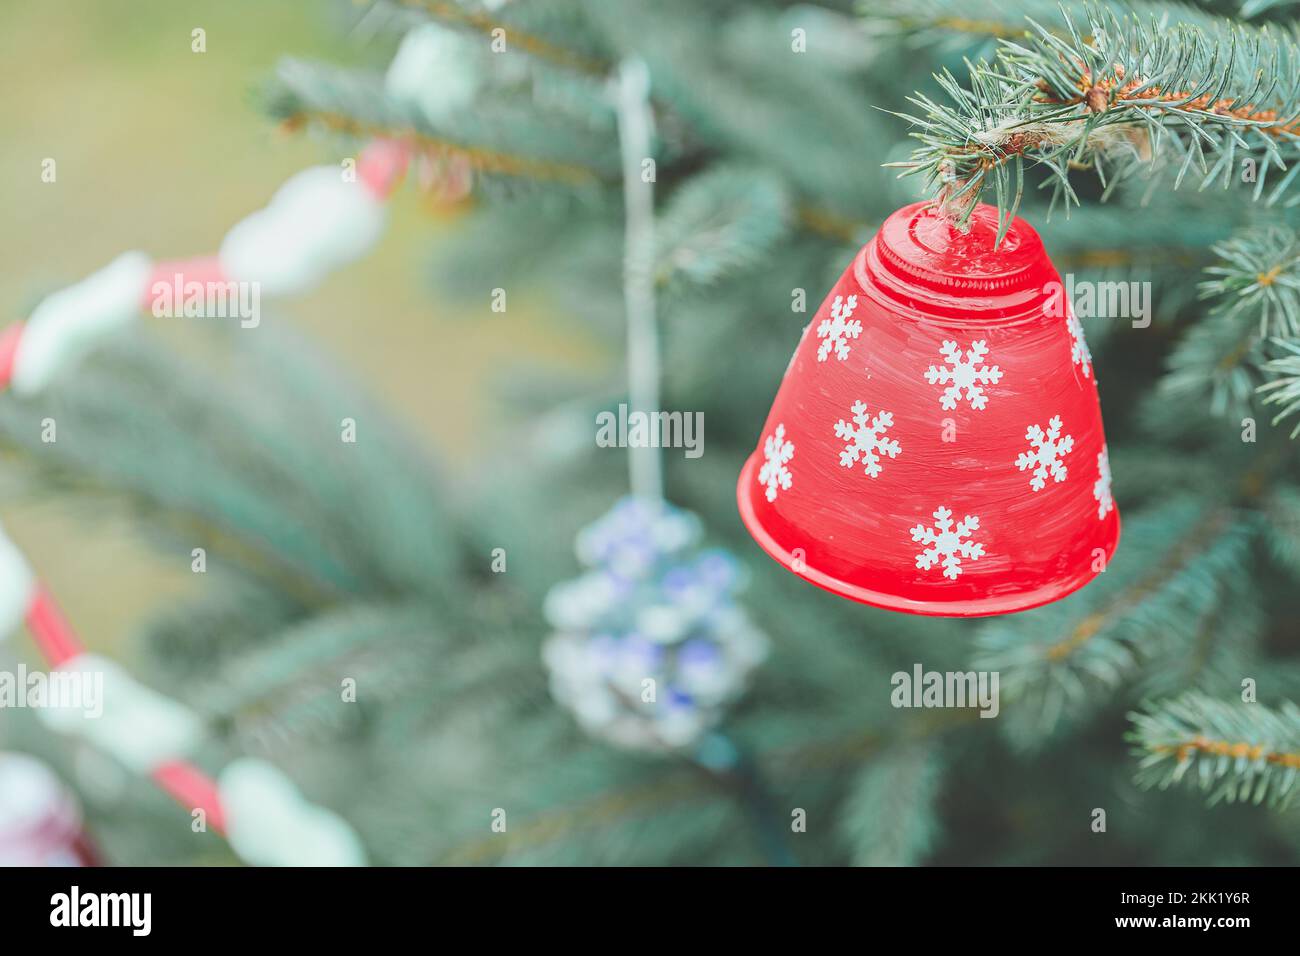 https://c8.alamy.com/comp/2KK1Y6R/painted-handmade-plastic-cup-bell-on-christmas-tree-diy-ideas-for-children-environment-recycle-upcycling-and-zero-waste-concept-selective-focus-2KK1Y6R.jpg